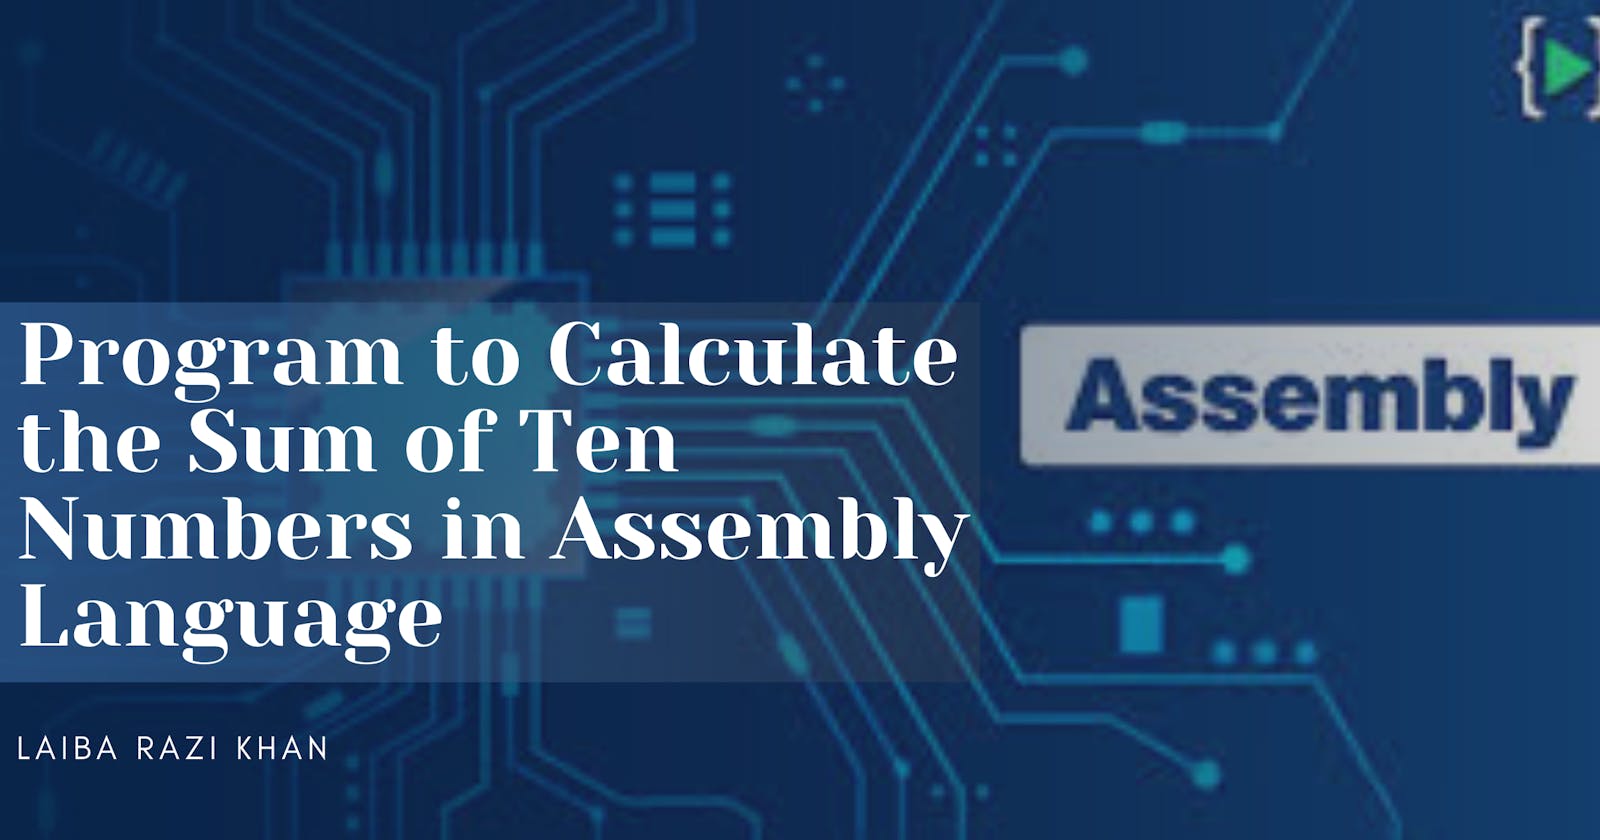 Program to Calculate the Sum of Ten Numbers in Assembly Language